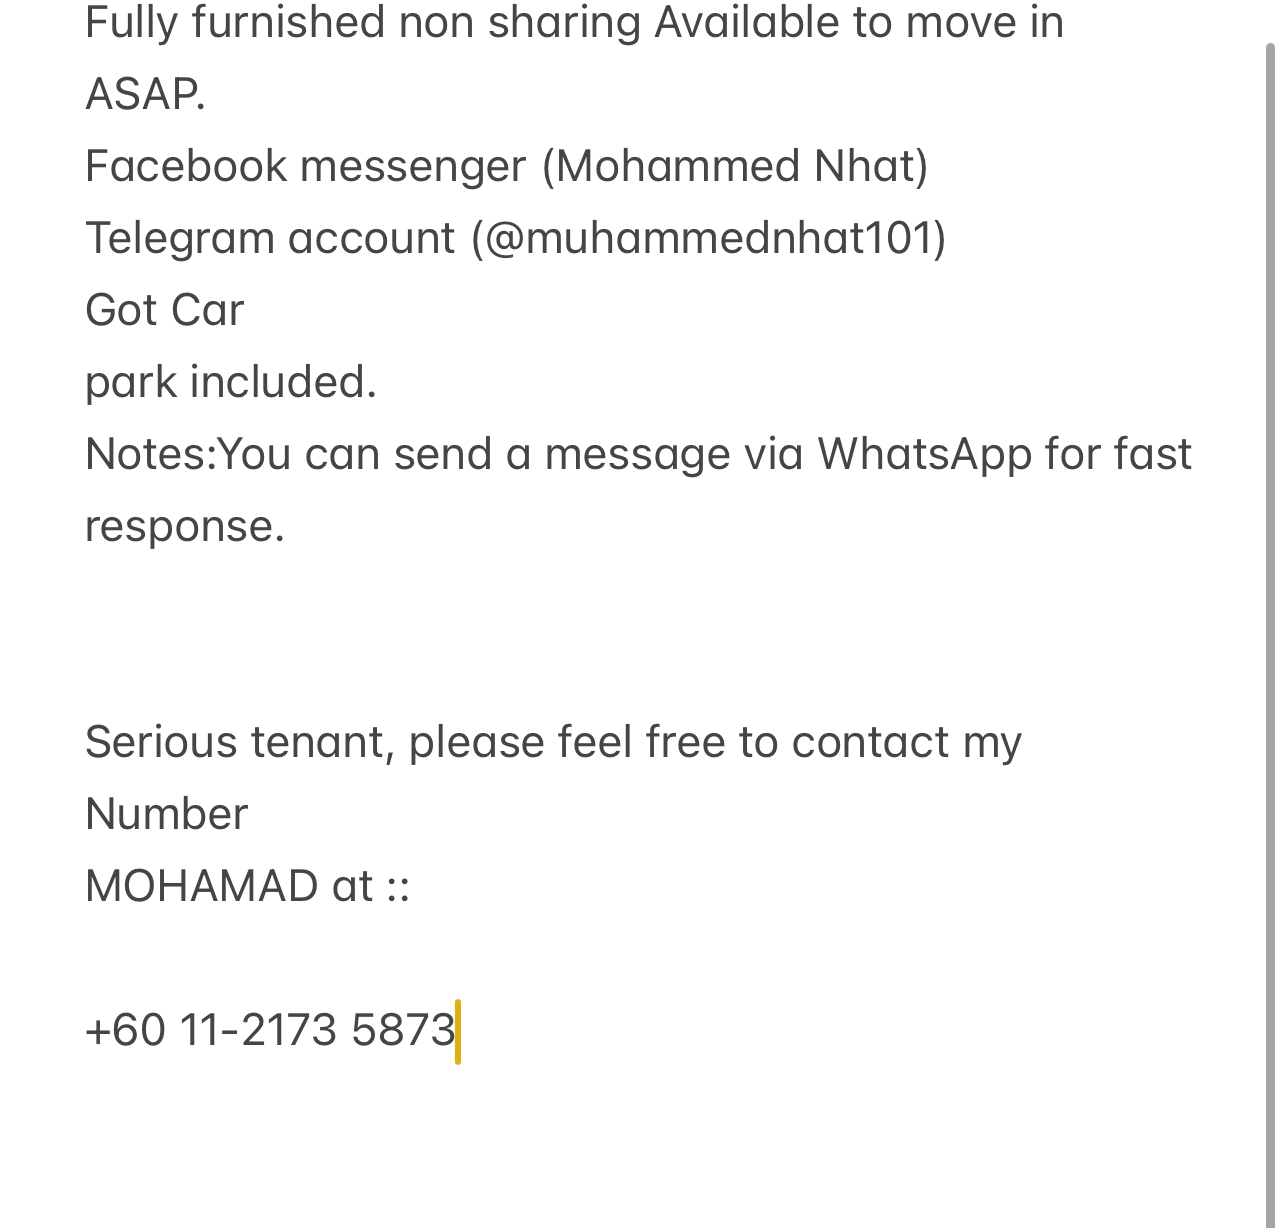 room for rent, studio, jalan boi ing, Send the owner a message on WhatsApp/facebook if you want to RENT the unit facebook (Mohammed Nhat)&Telegram(@muhammednhat101) Fully furnished non sharing :(comfortable)